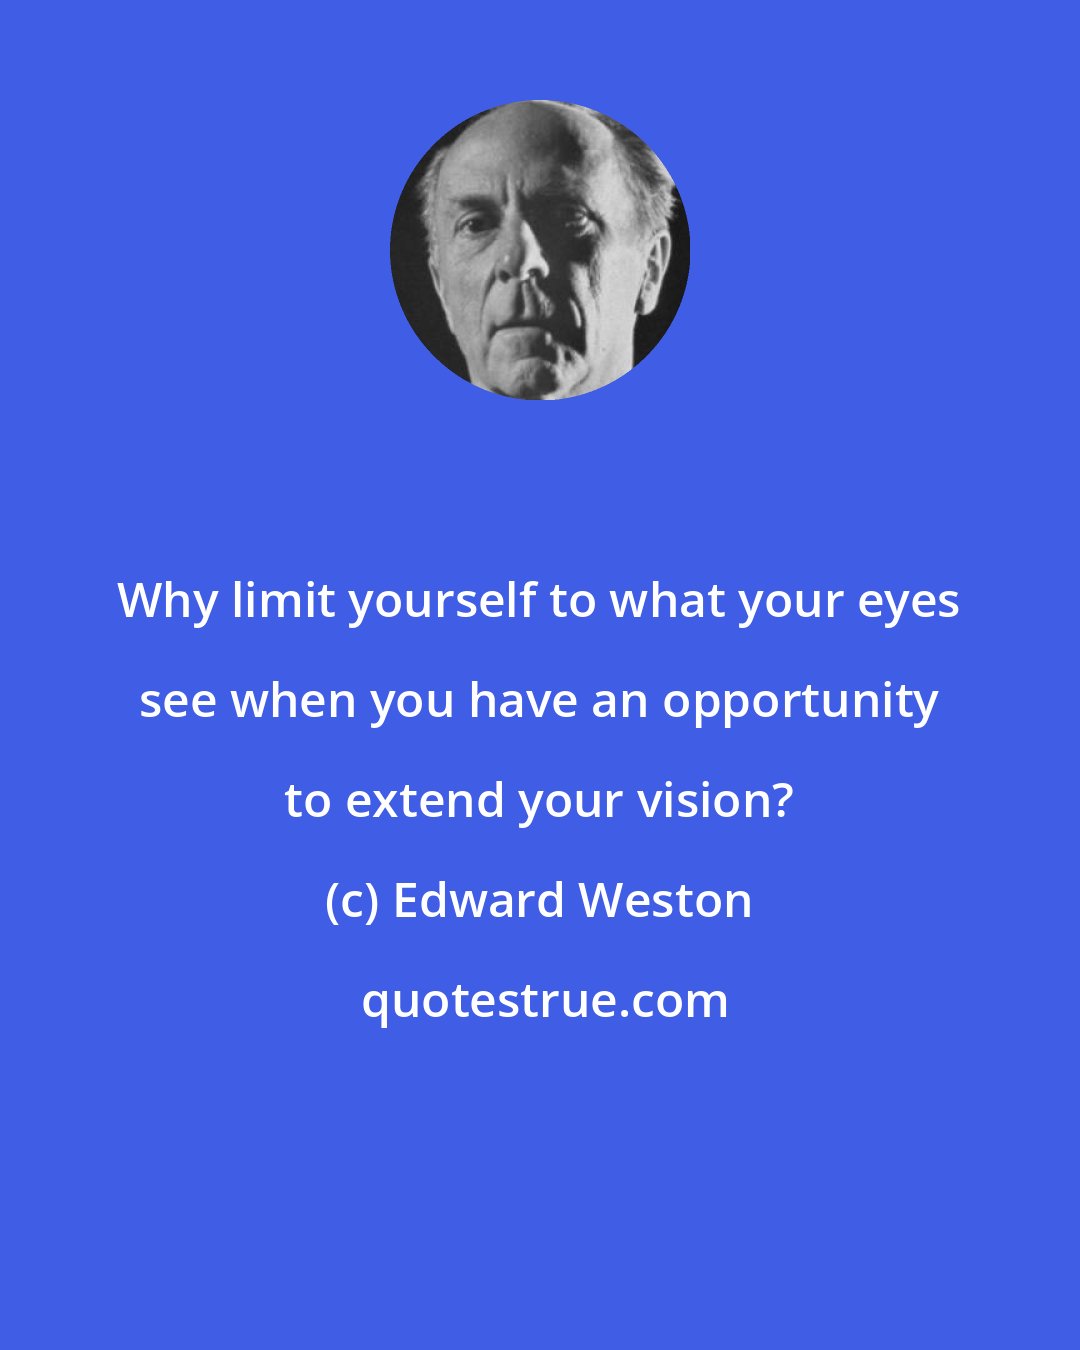 Edward Weston: Why limit yourself to what your eyes see when you have an opportunity to extend your vision?